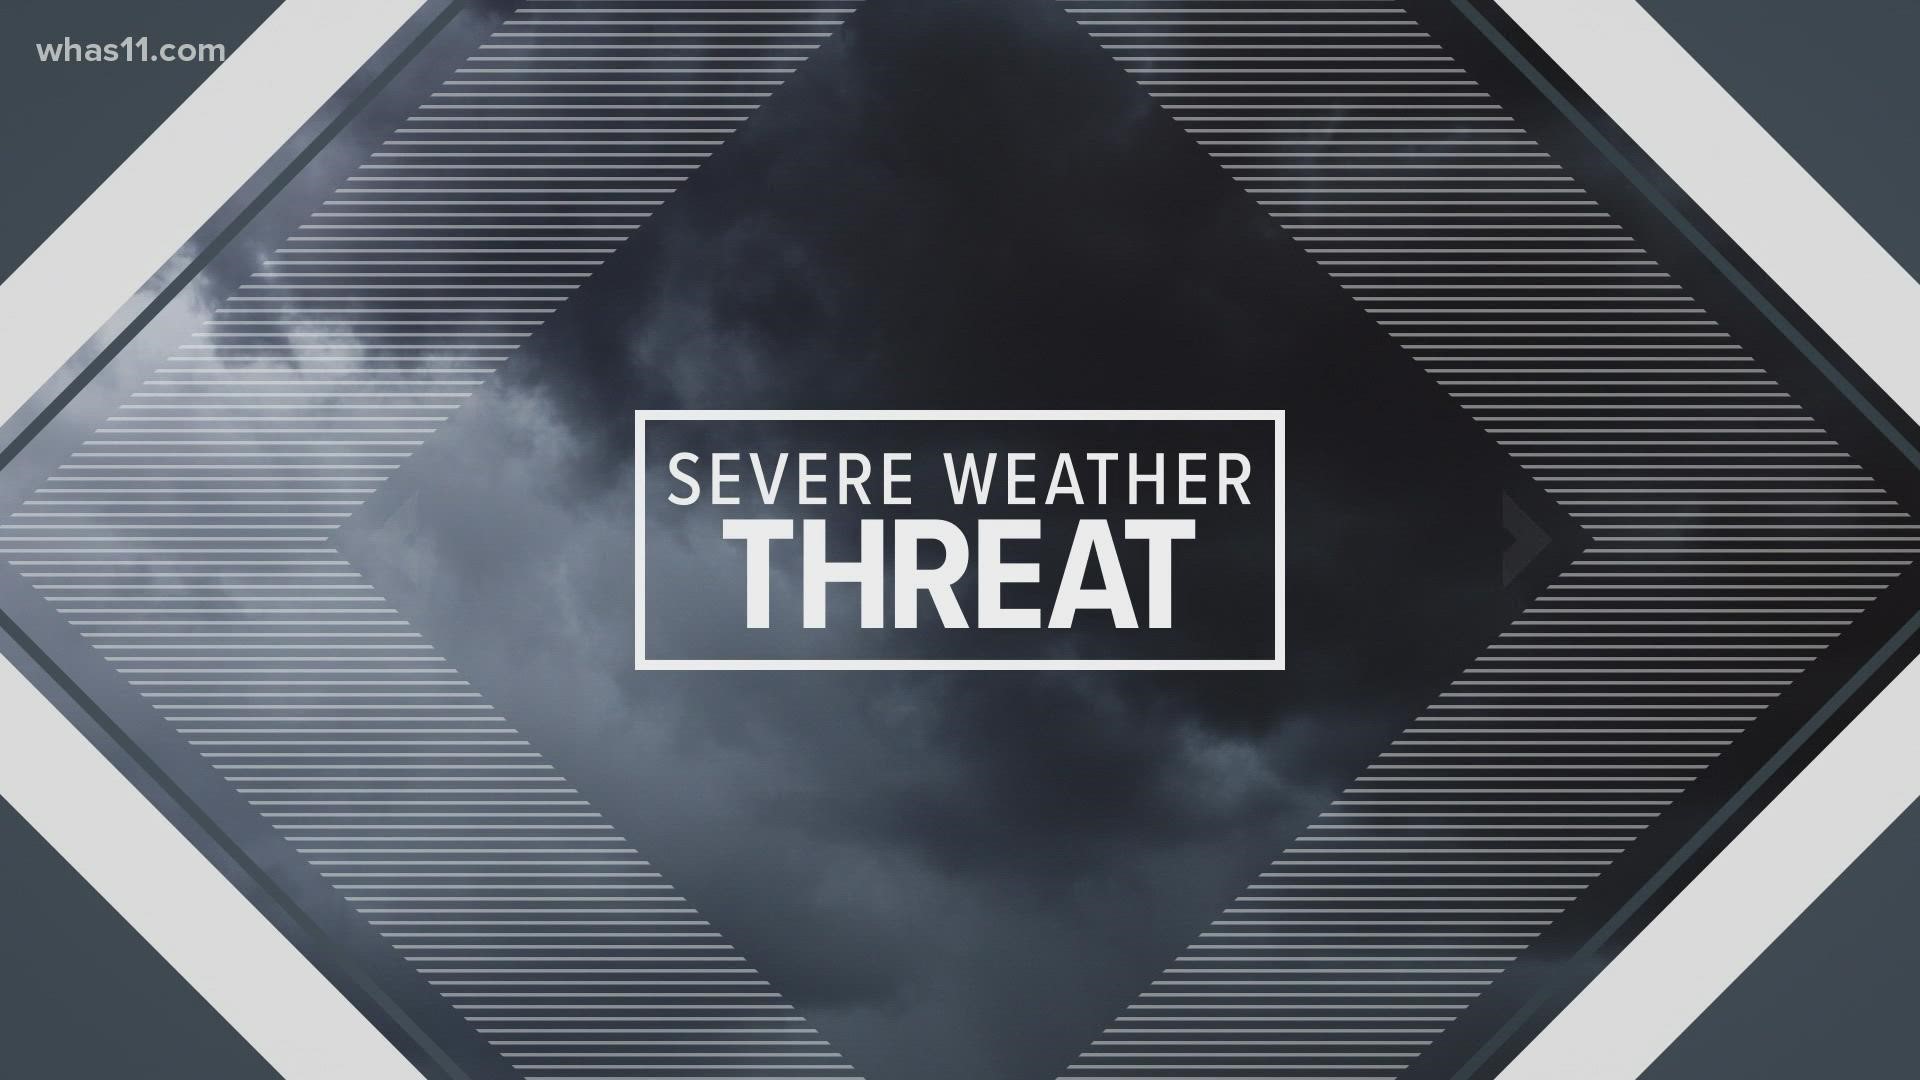 With severe weather approaching, here's some tips to help you prepare for the upcoming storms.